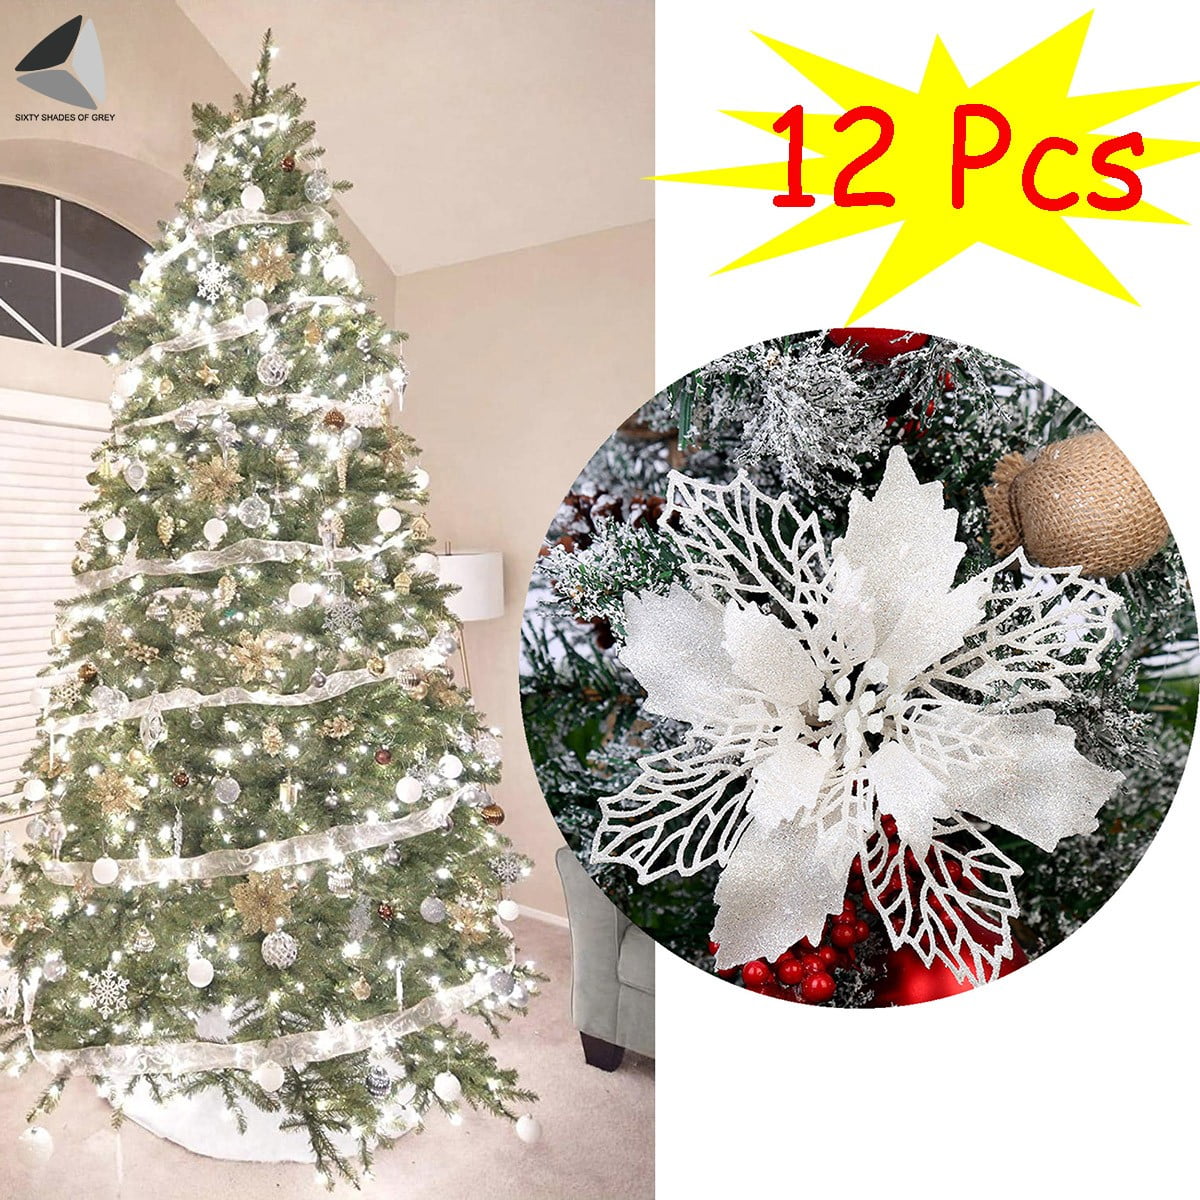 Toddmomy 12 Pieces Christmas Poinsettia Flowers Glitter Artificial Poinsettia Flowers Christmas Poinsettia Decorations Christmas Tree Ornaments with 12 Pieces Stems and Clips Champagne Gold